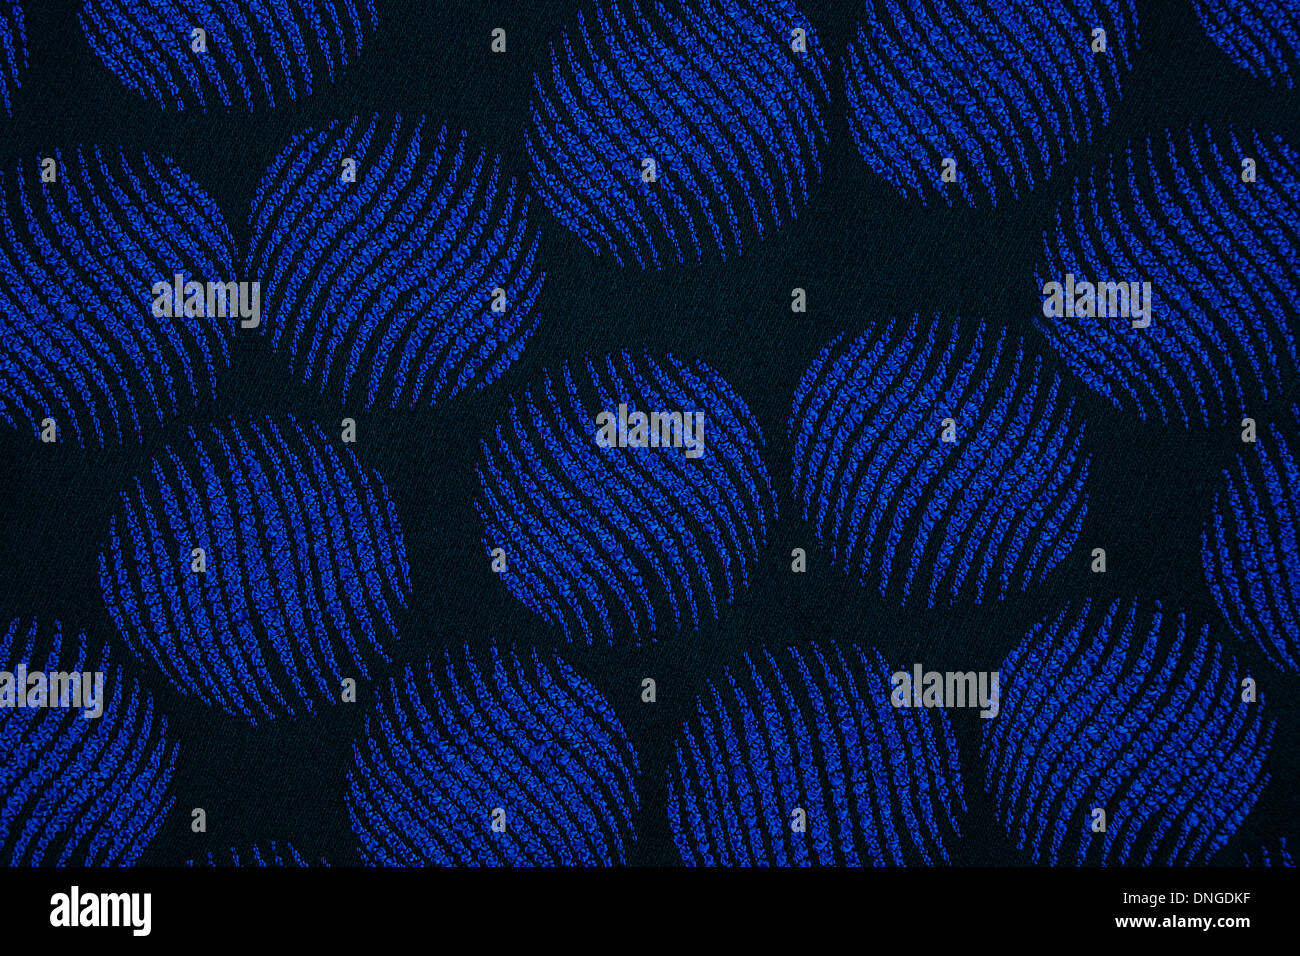 Material in the blue circles, a navy-blue textile background Stock Photo